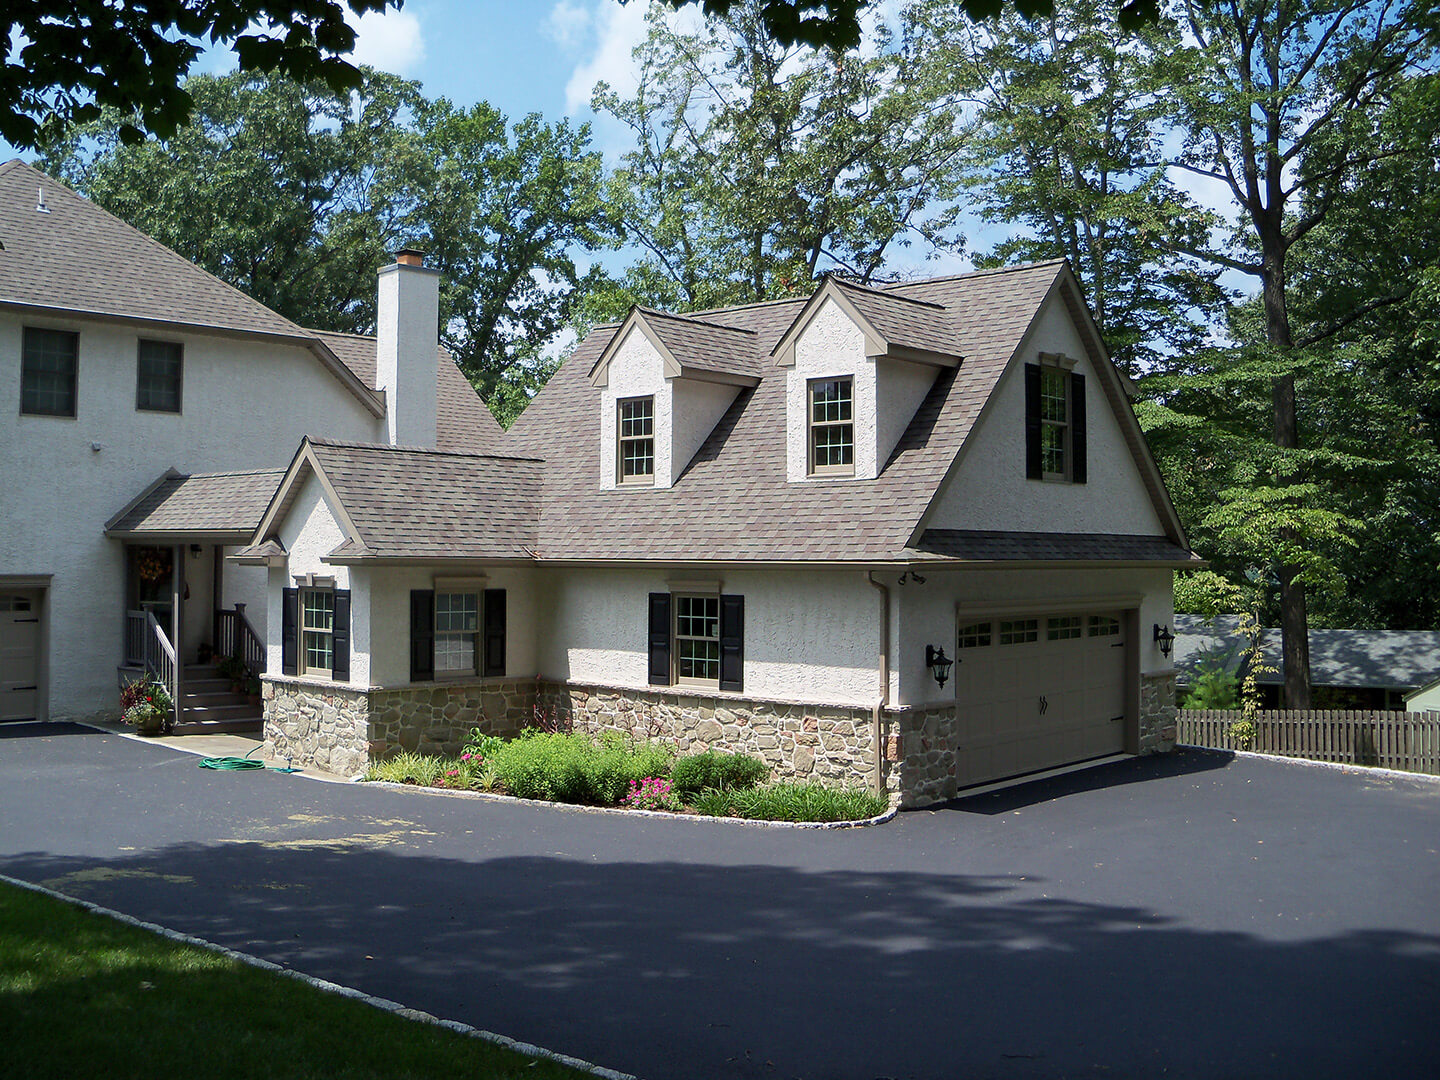 cape cod style stucco and stone garage addition with second floor